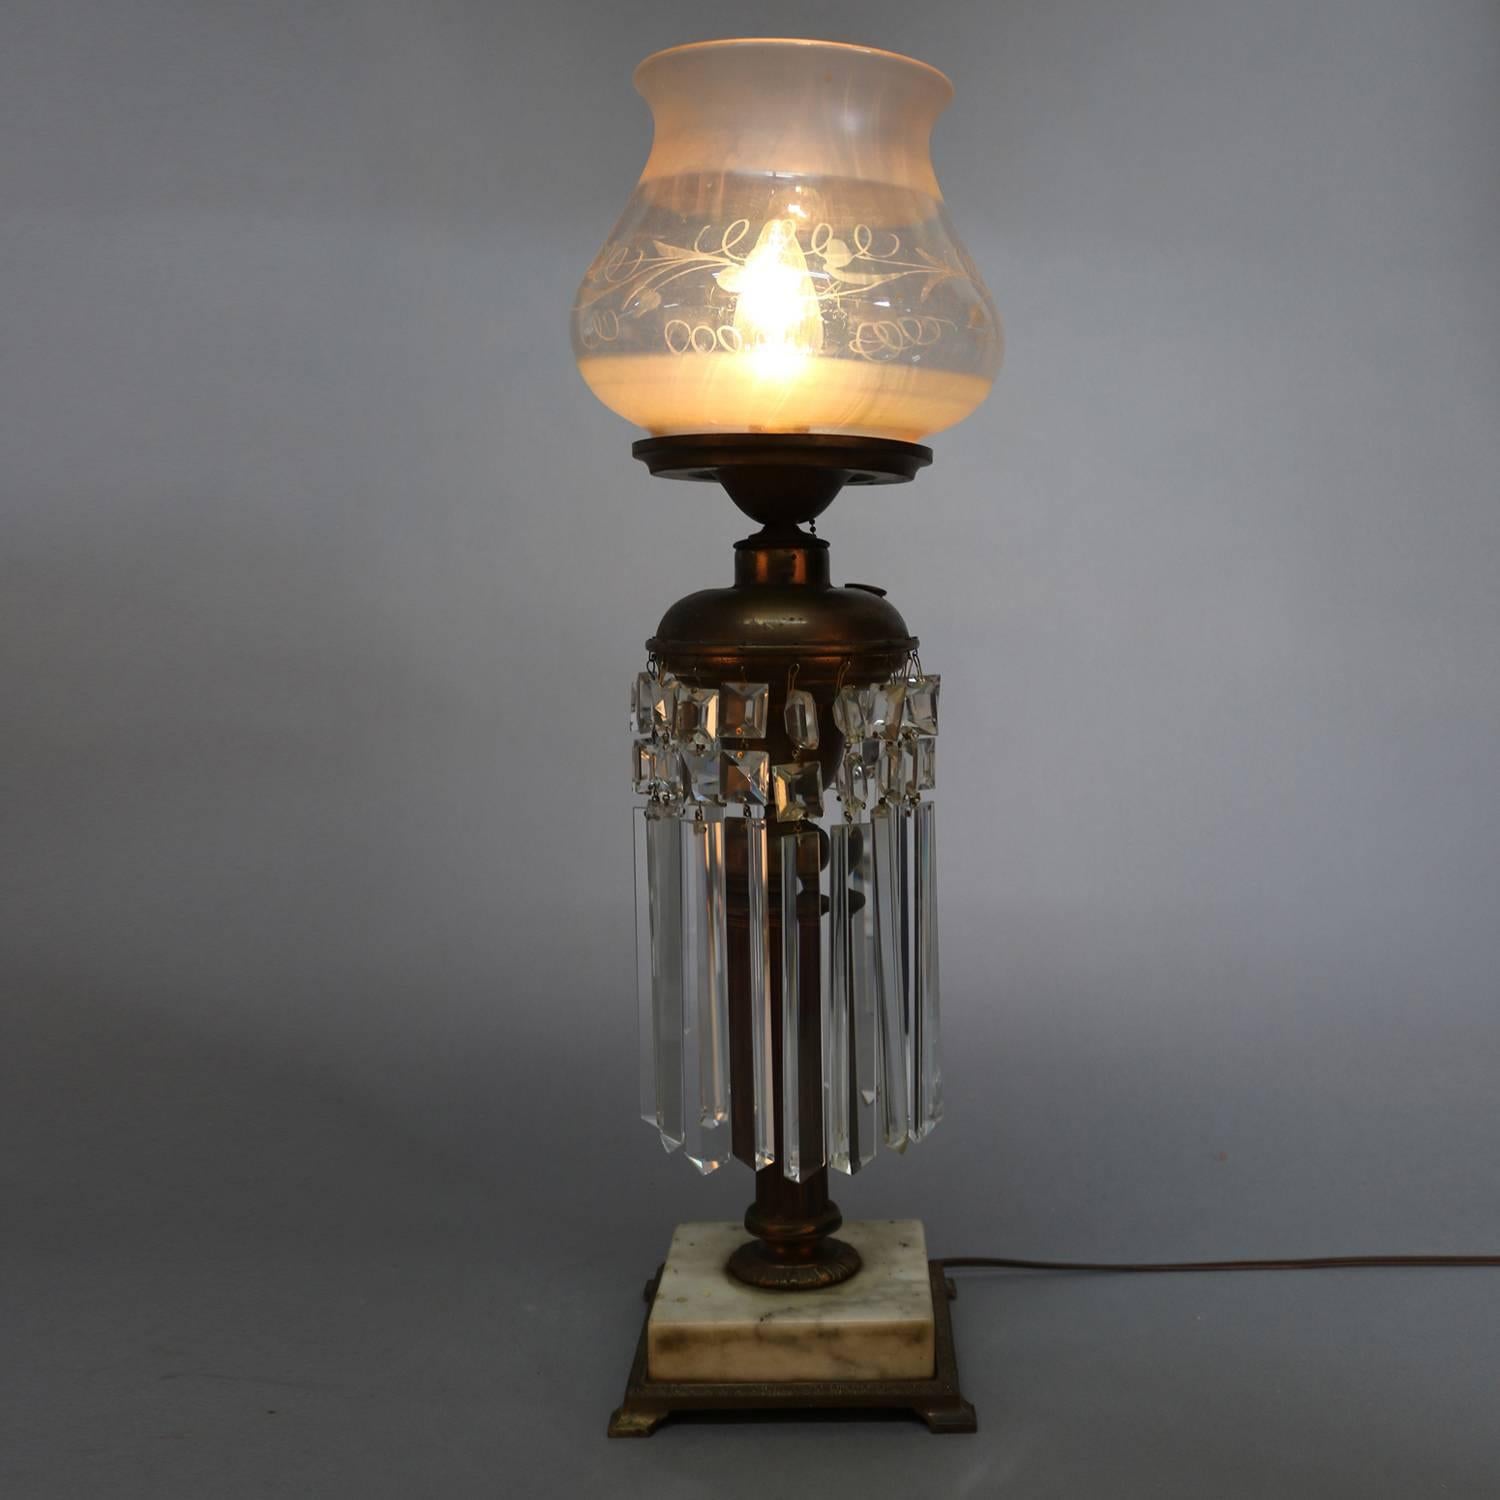 Antique gilt bronze electrified solar lamp features reeded pedestal supporting font laden with hanging cut crystal prisms, marble base with footed gilt base with egg and dart trimming, etched glass glove with floral decoration, newly re-wired,